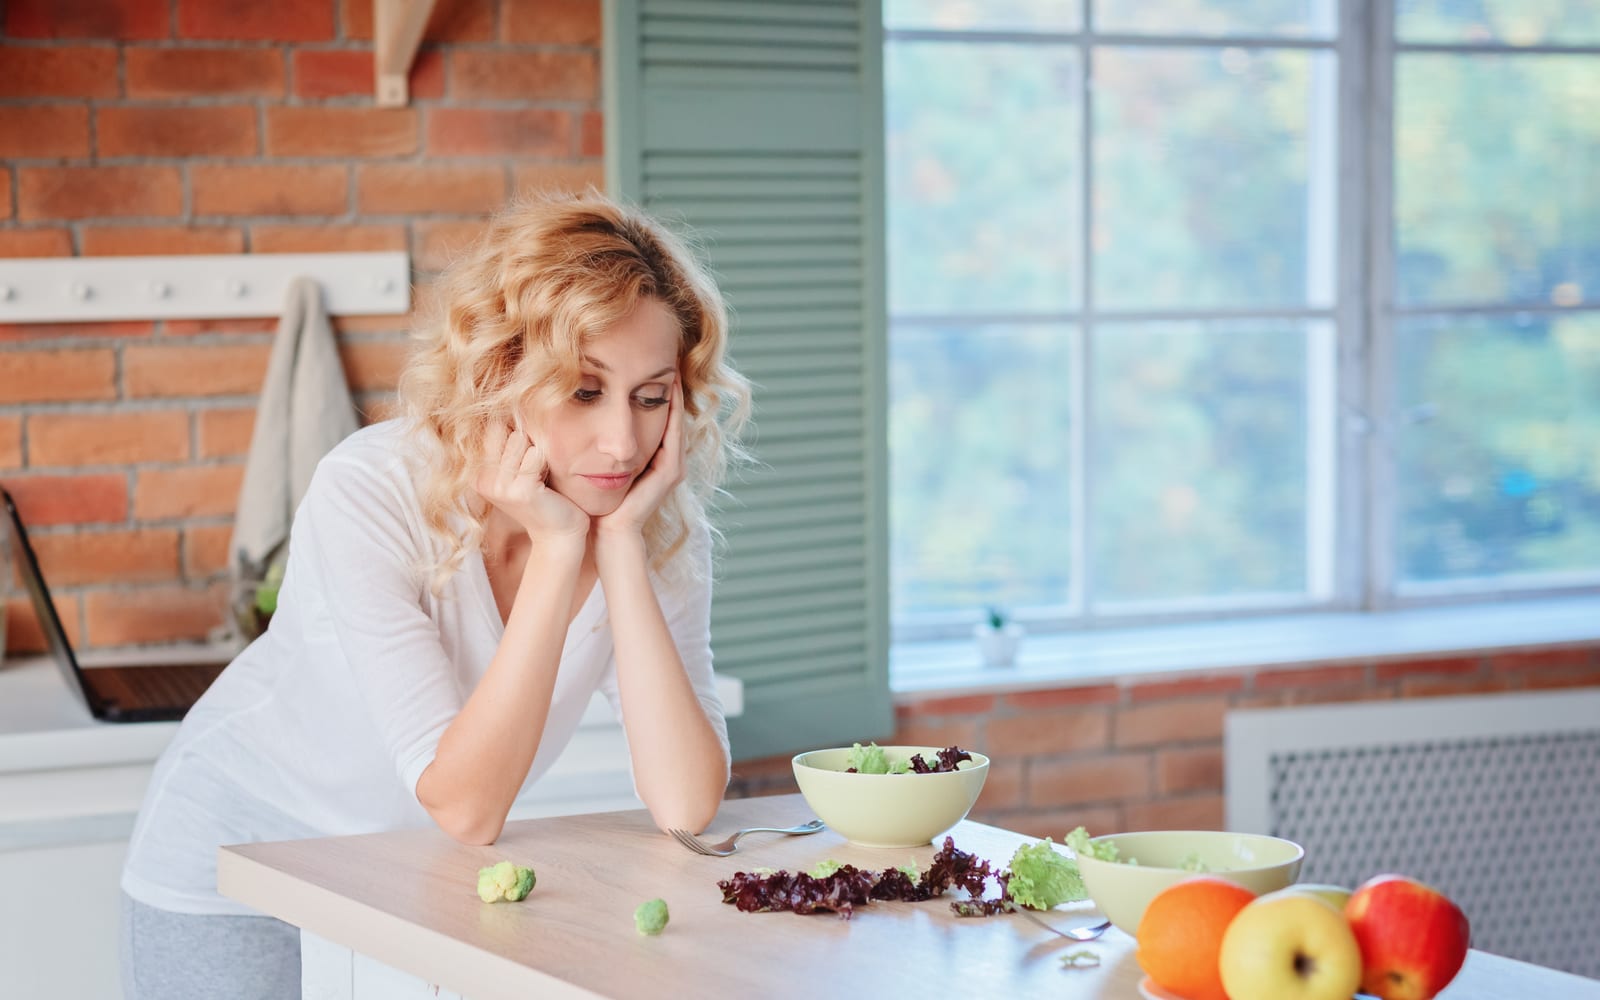 Depressed woman at kitchen table